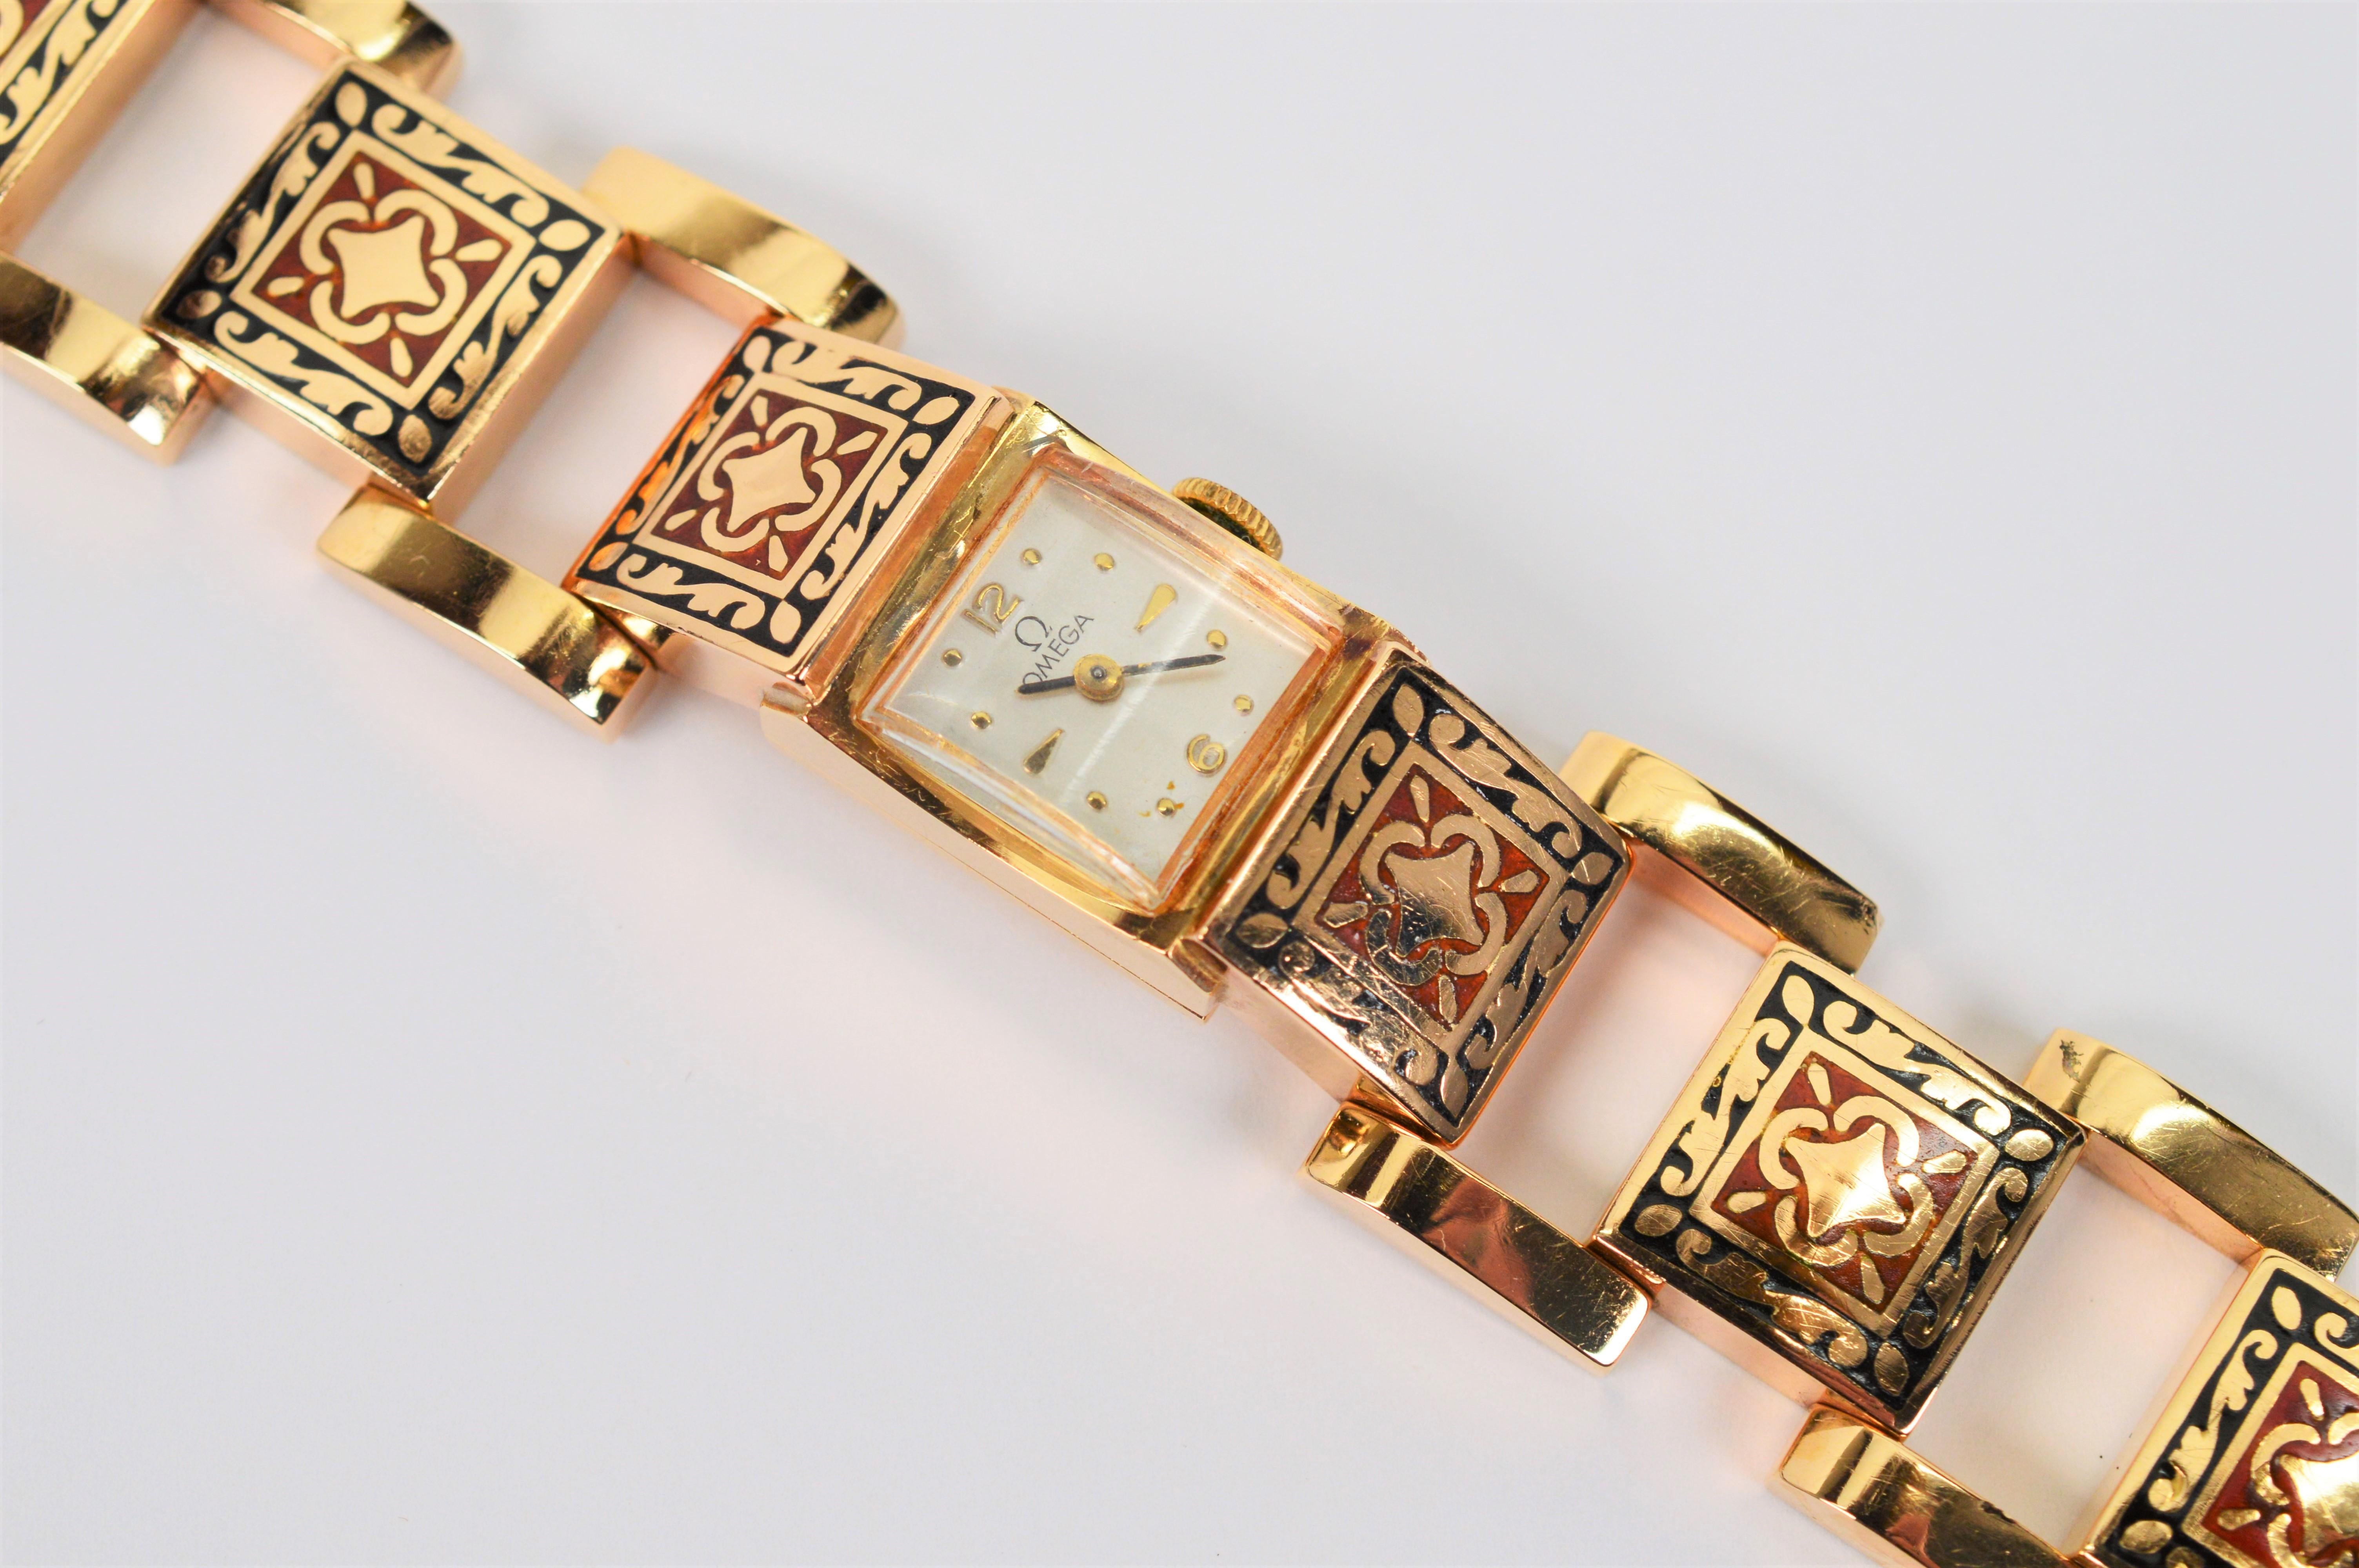 An artful renaissance inspired intricate pattern of red and black enamel inlay decorates each square link of fourteen karat 14K yellow gold along this fine Ladies Omega Bracelet Wrist Watch.
This uniquely attractive jewelry timepiece is a winder